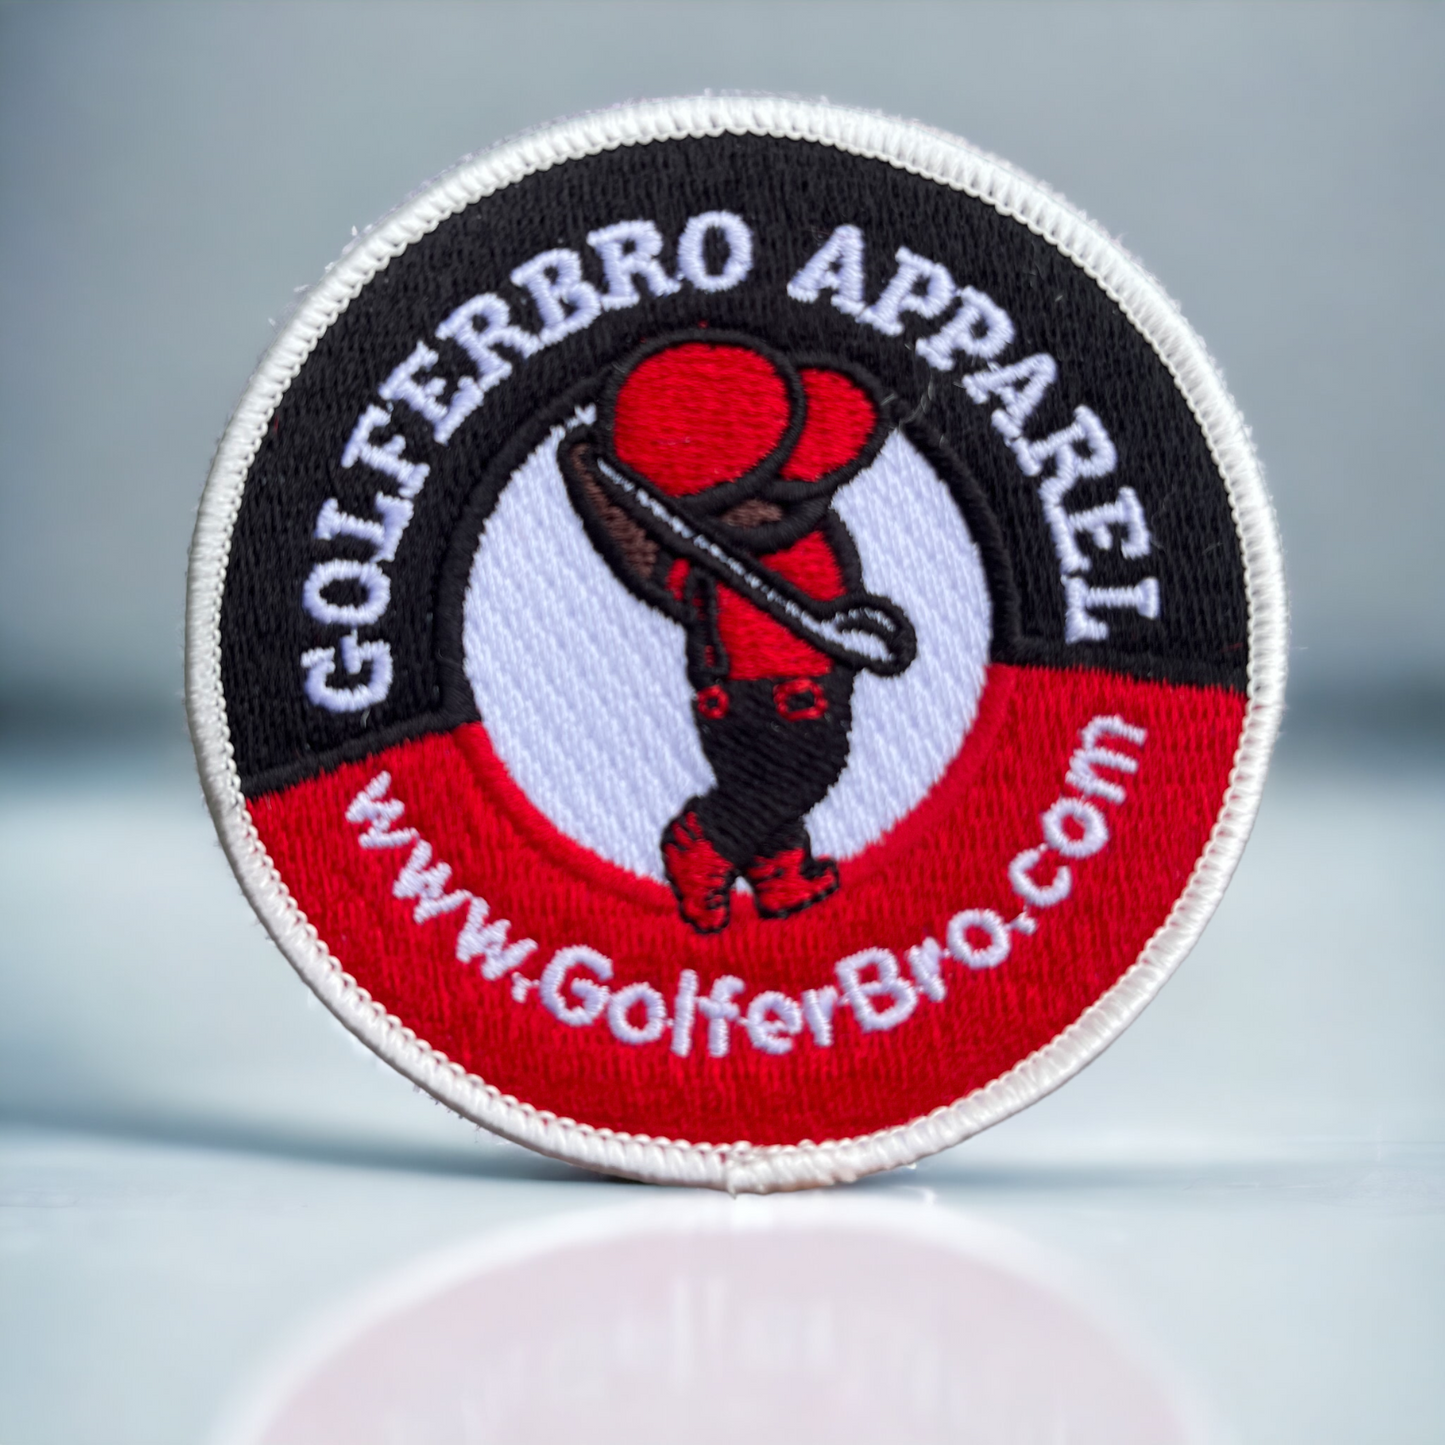 Golfer Bro Patches